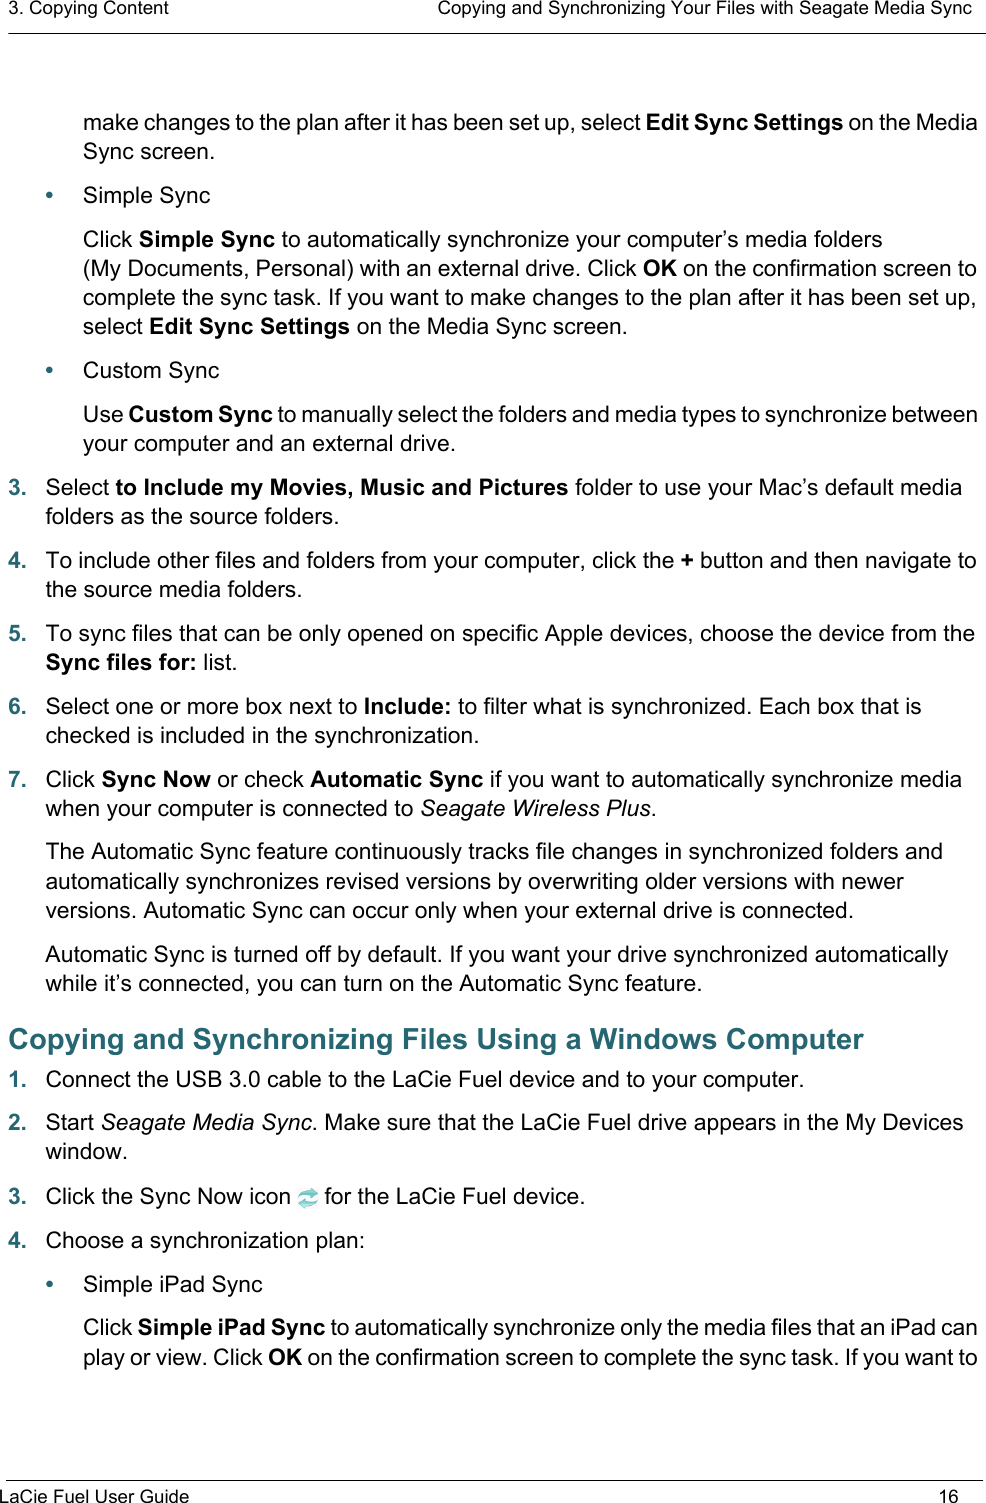 3. Copying Content  Copying and Synchronizing Your Files with Seagate Media SyncLaCie Fuel User Guide 16make changes to the plan after it has been set up, select Edit Sync Settings on the Media Sync screen.•Simple SyncClick Simple Sync to automatically synchronize your computer’s media folders (My Documents, Personal) with an external drive. Click OK on the confirmation screen to complete the sync task. If you want to make changes to the plan after it has been set up, select Edit Sync Settings on the Media Sync screen.•Custom SyncUse Custom Sync to manually select the folders and media types to synchronize between your computer and an external drive.3. Select to Include my Movies, Music and Pictures folder to use your Mac’s default media folders as the source folders.4. To include other files and folders from your computer, click the + button and then navigate to the source media folders.5. To sync files that can be only opened on specific Apple devices, choose the device from the Sync files for: list.6. Select one or more box next to Include: to filter what is synchronized. Each box that is checked is included in the synchronization.7. Click Sync Now or check Automatic Sync if you want to automatically synchronize media when your computer is connected to Seagate Wireless Plus.The Automatic Sync feature continuously tracks file changes in synchronized folders and automatically synchronizes revised versions by overwriting older versions with newer versions. Automatic Sync can occur only when your external drive is connected.Automatic Sync is turned off by default. If you want your drive synchronized automatically while it’s connected, you can turn on the Automatic Sync feature.Copying and Synchronizing Files Using a Windows Computer1. Connect the USB 3.0 cable to the LaCie Fuel device and to your computer.2. Start Seagate Media Sync. Make sure that the LaCie Fuel drive appears in the My Devices window.3. Click the Sync Now icon for the LaCie Fuel device.4. Choose a synchronization plan:•Simple iPad SyncClick Simple iPad Sync to automatically synchronize only the media files that an iPad can play or view. Click OK on the confirmation screen to complete the sync task. If you want to 